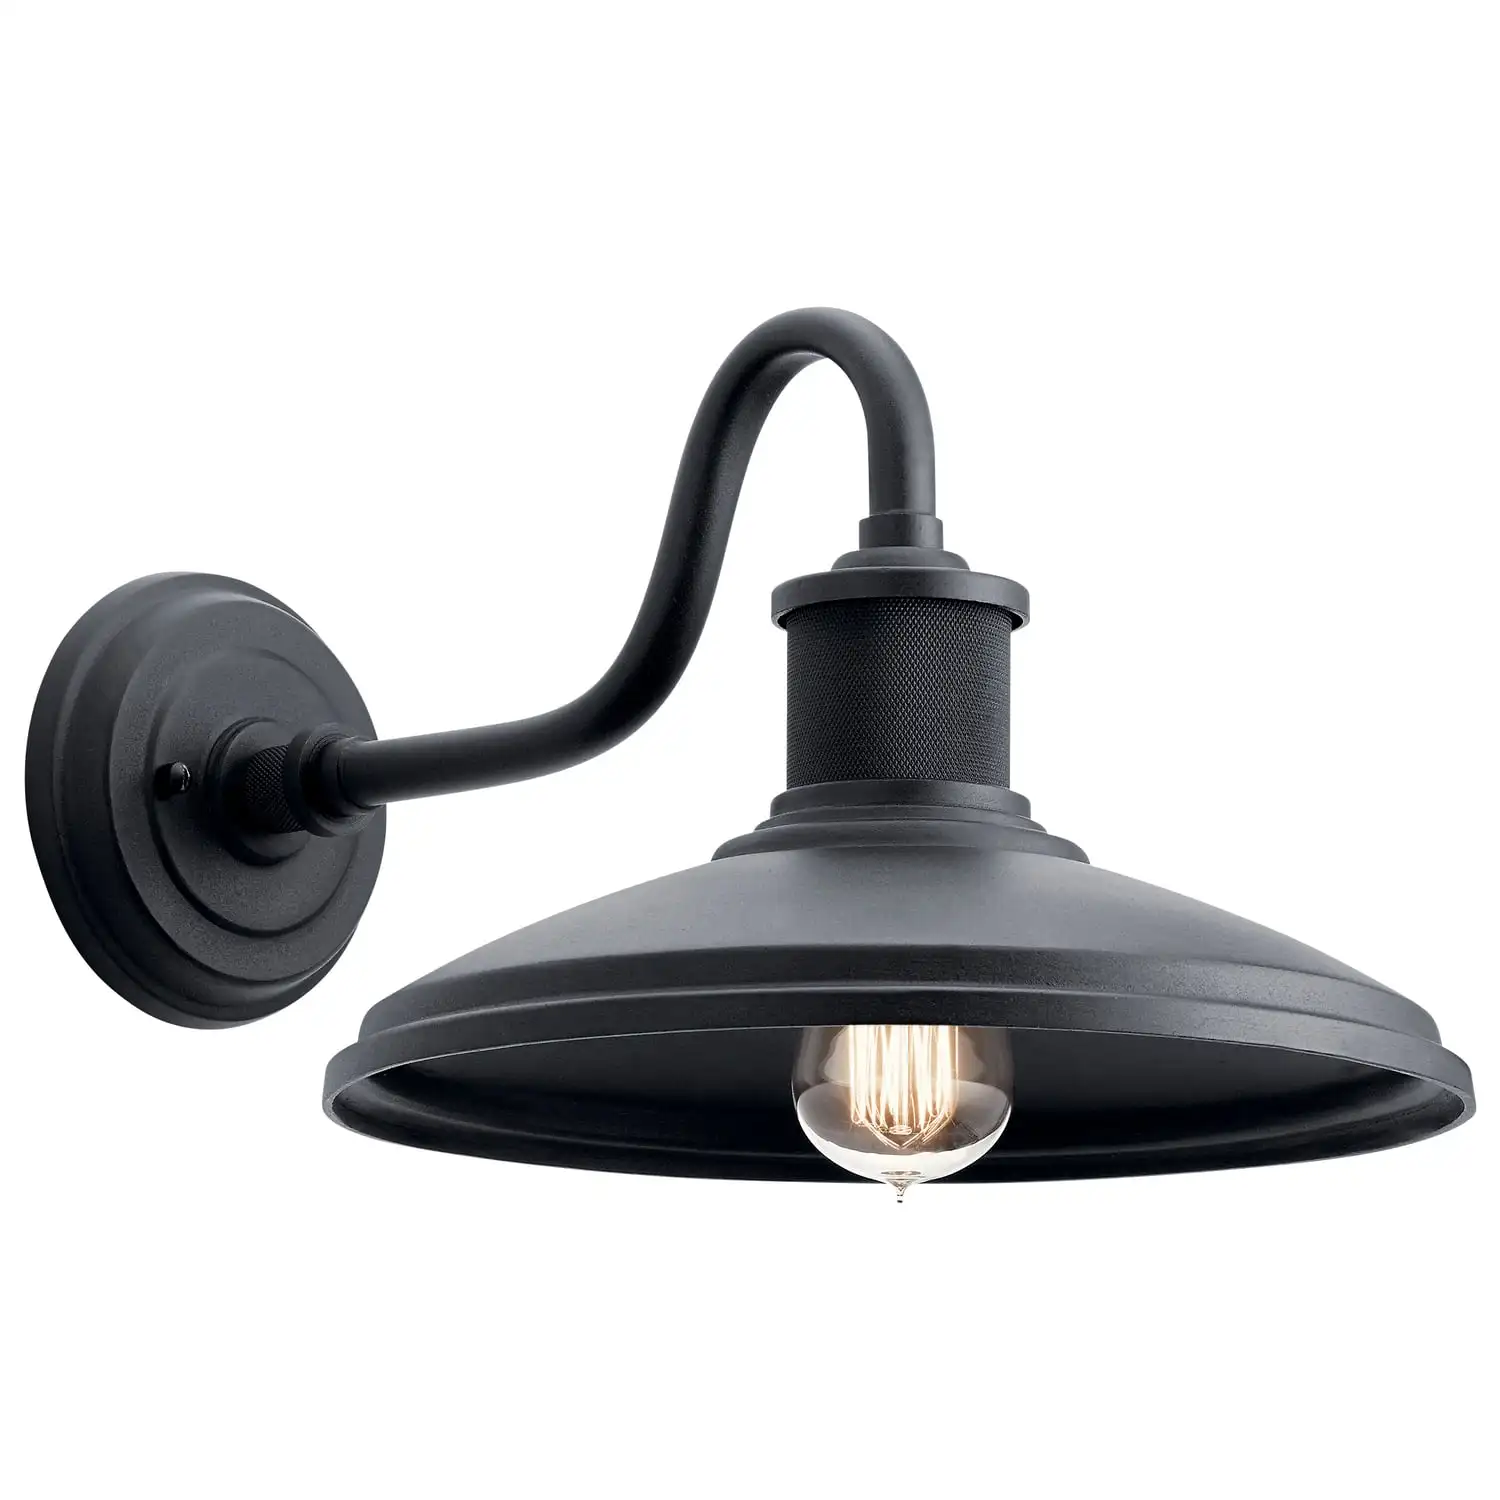 

Allenbury 1 Light Textured Black Outdoor Wall Sconce with Clear Seeded Glass